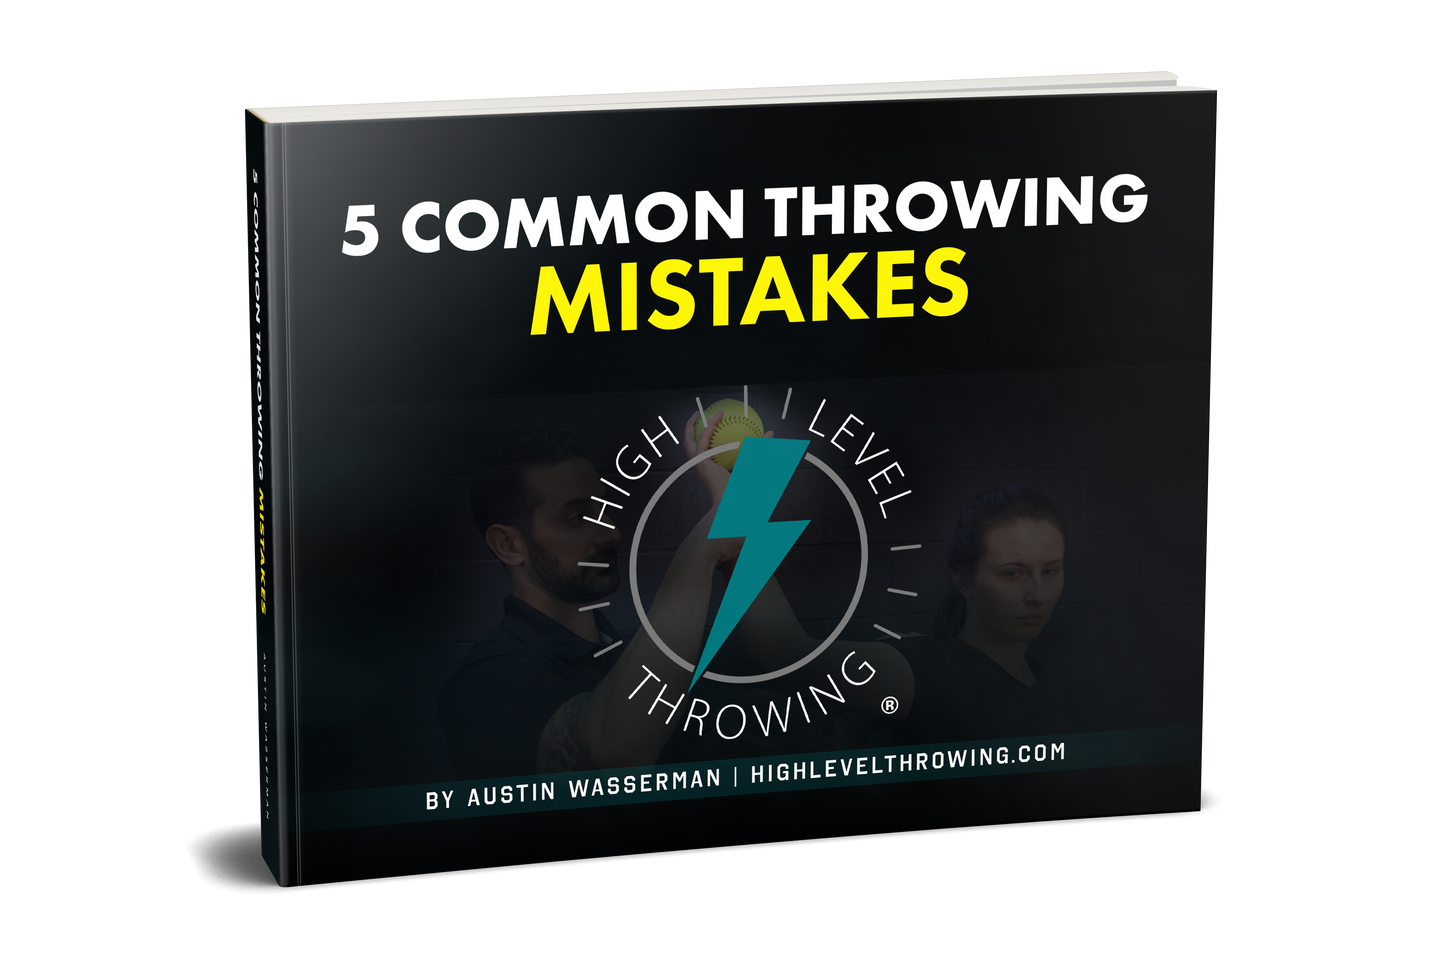 5 Common Throwing Mistakes